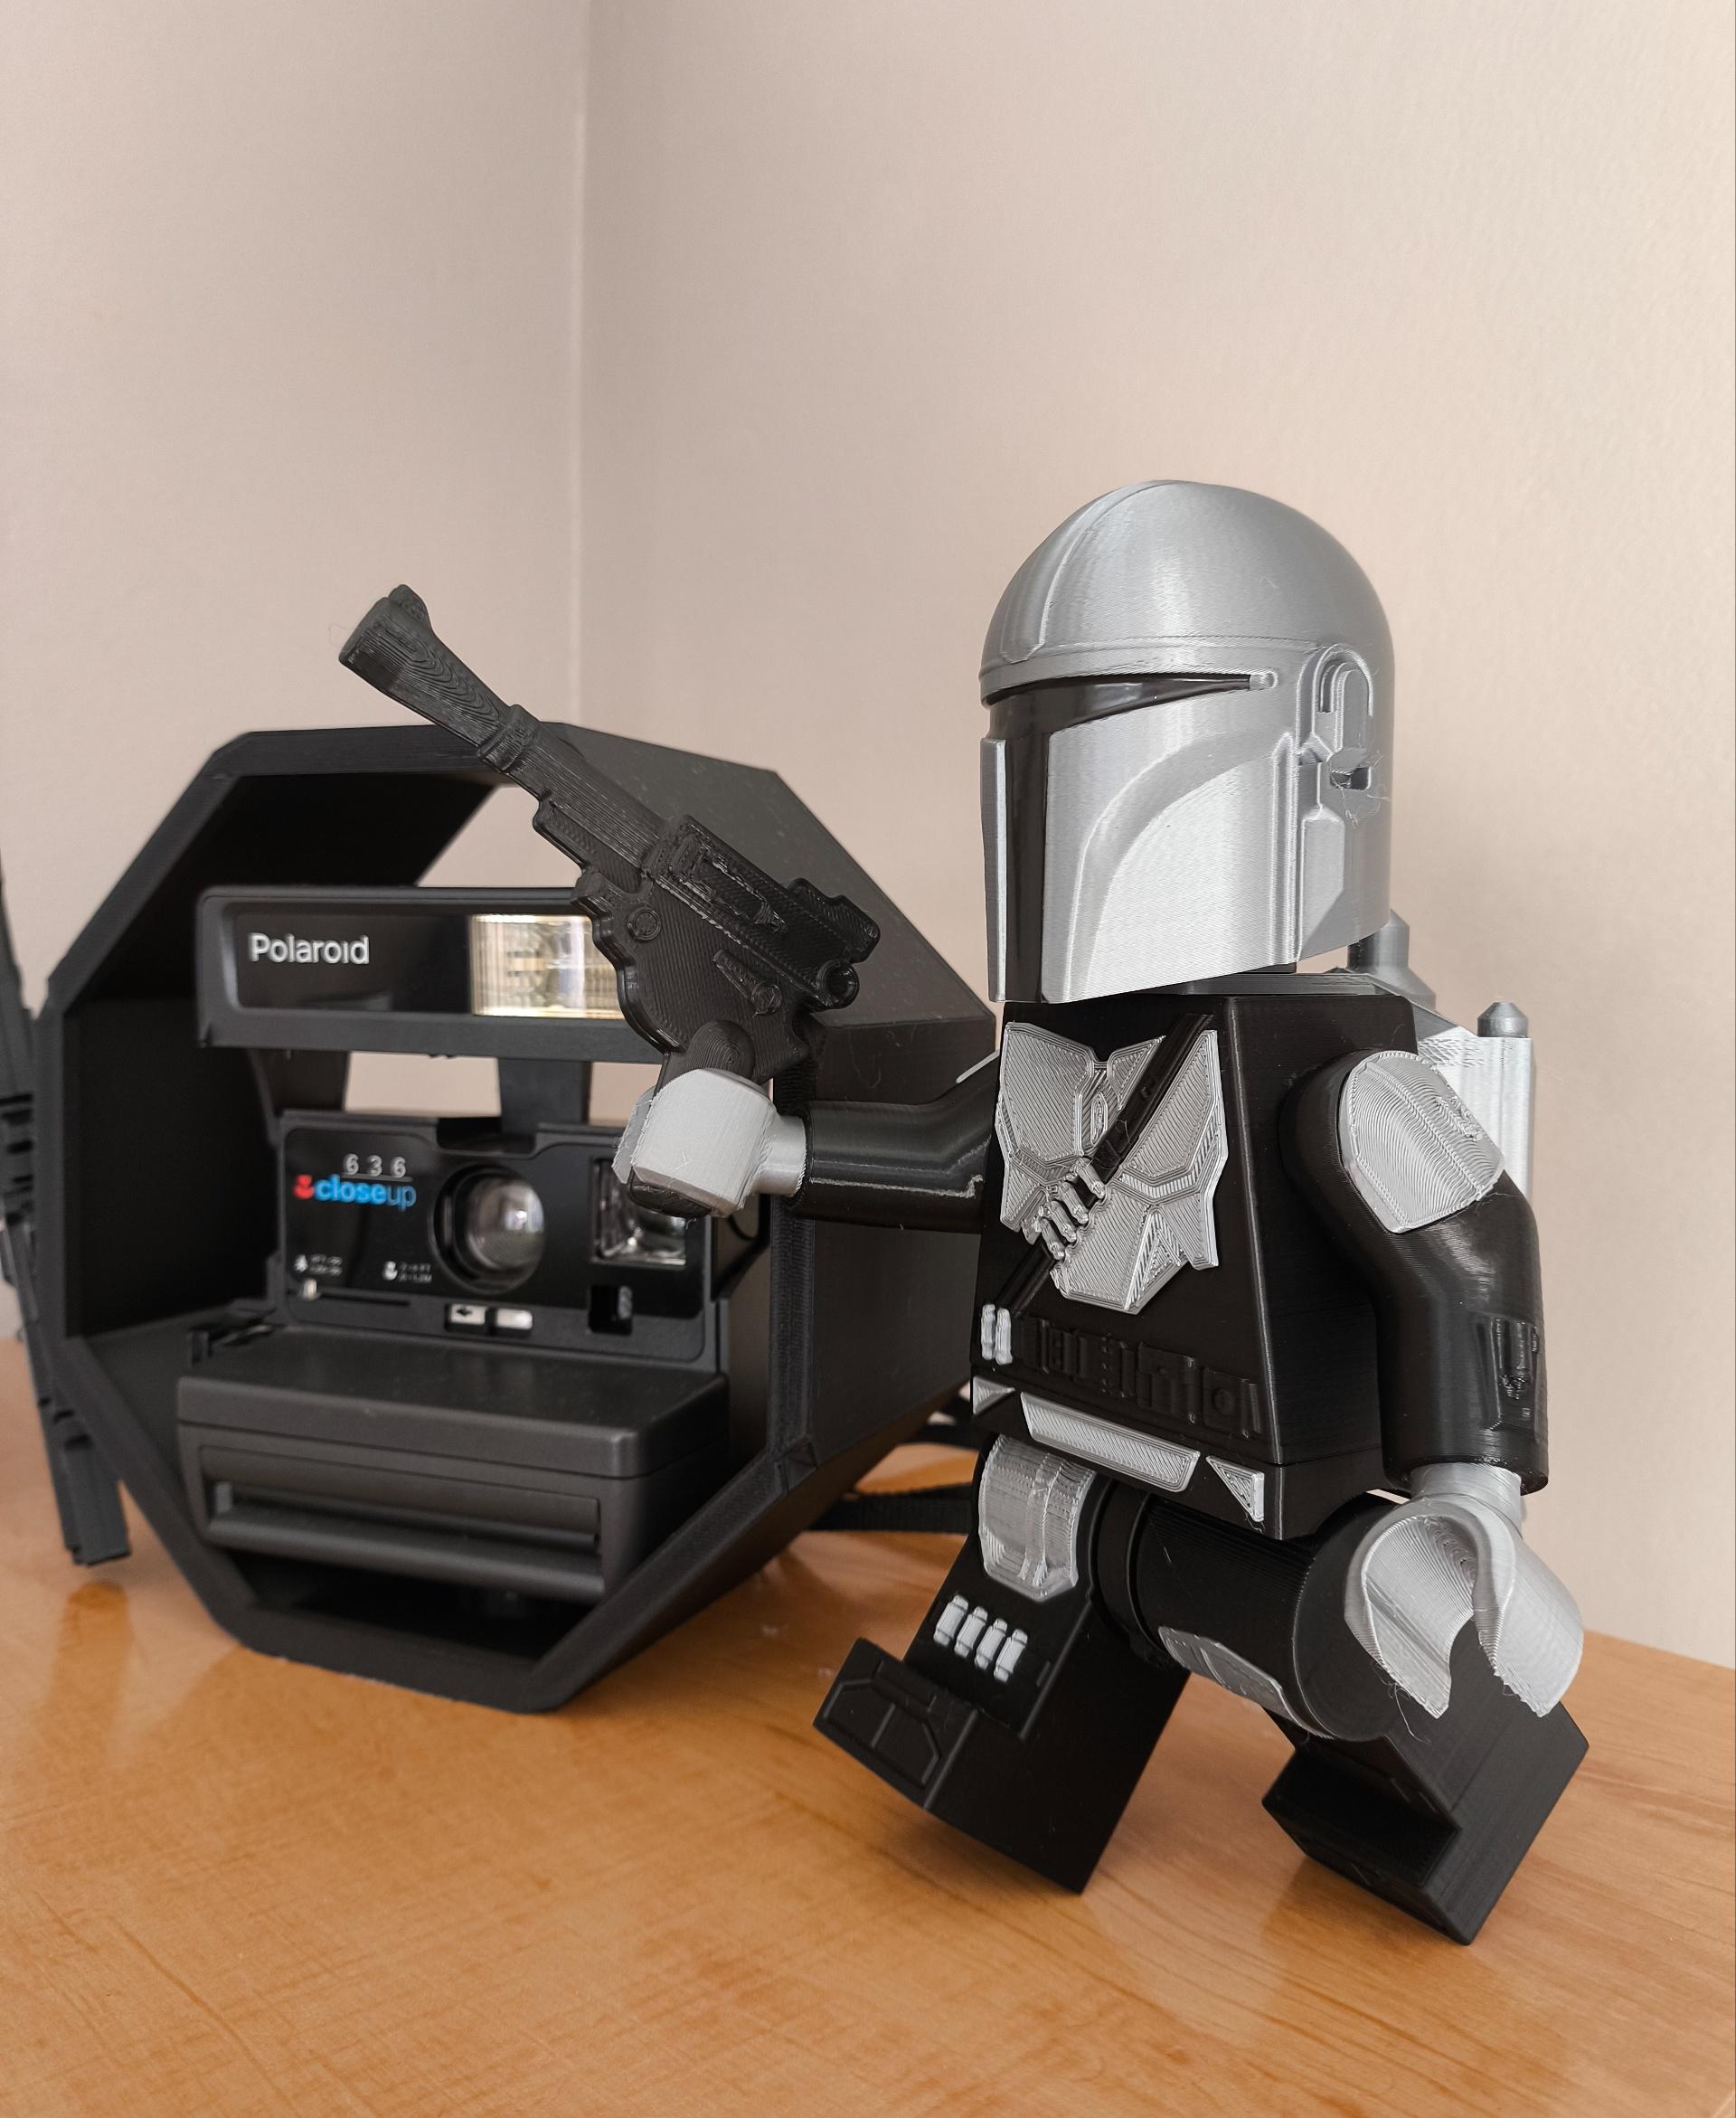 The Mandalorian (6:1 LEGO - This is amazing!
Don't forget to make the XY compensation adjustment with the test piece. So that everything fits perfectly when calibrating your printer. I already had trouble with this in Stormtrooper.https://www.thingiverse.com/thing:342198 - 3d model